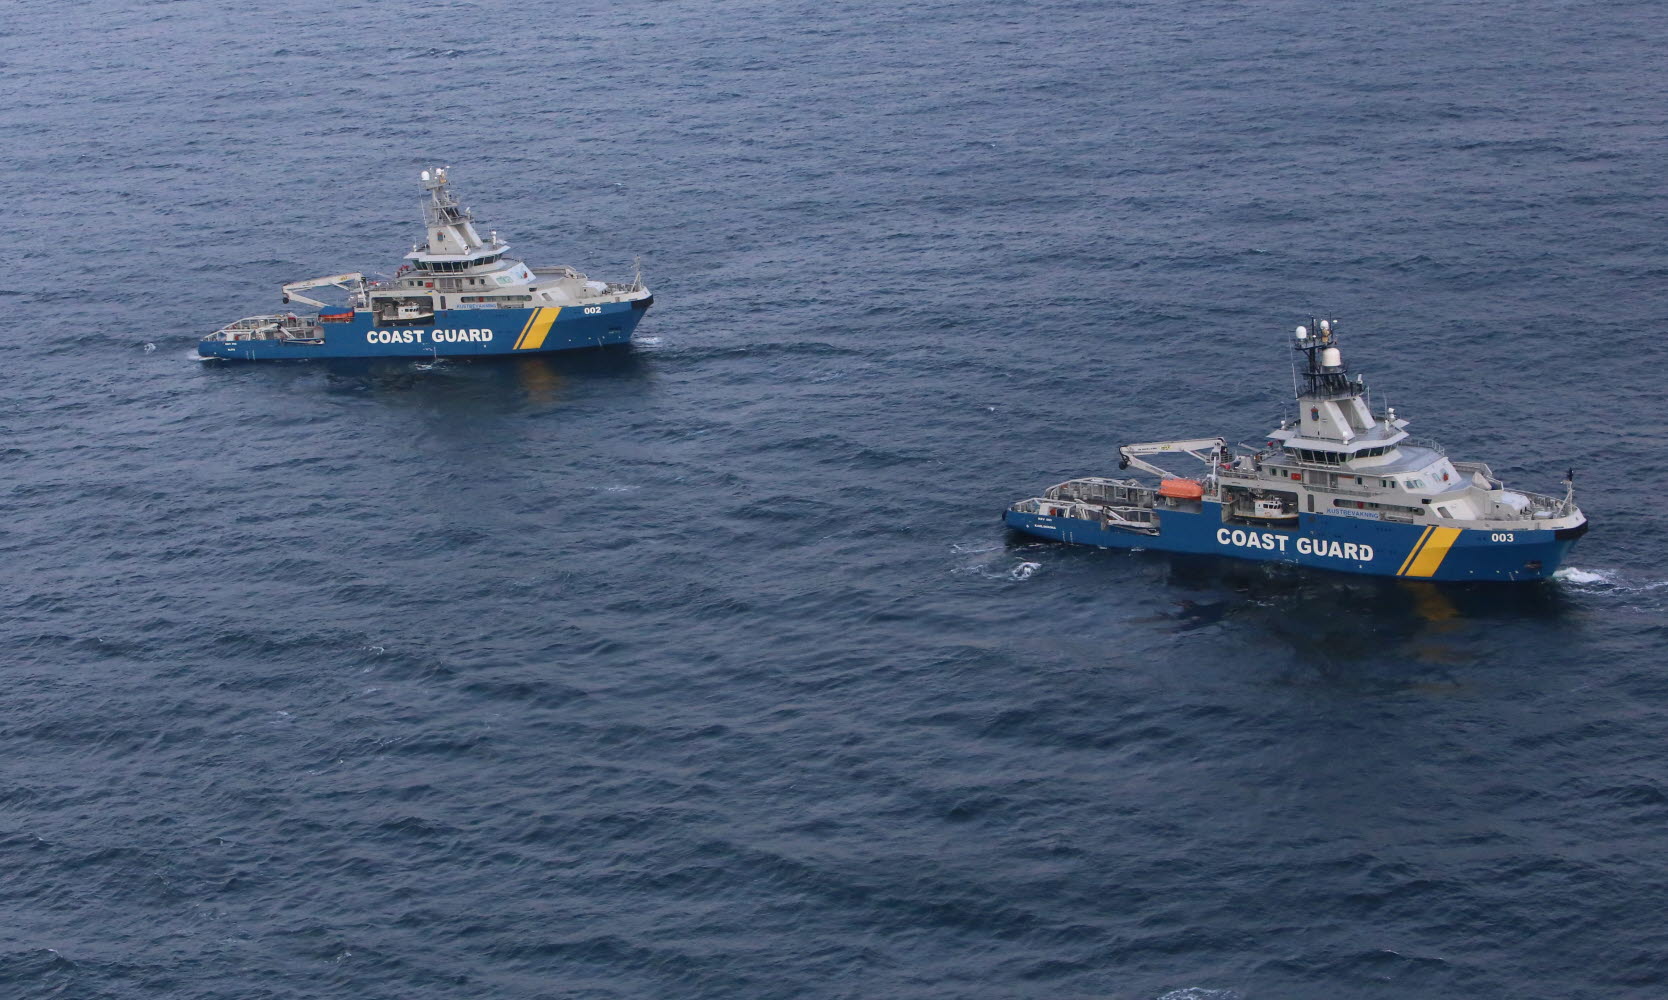 The combination vessels KBV 002 and KBV 003